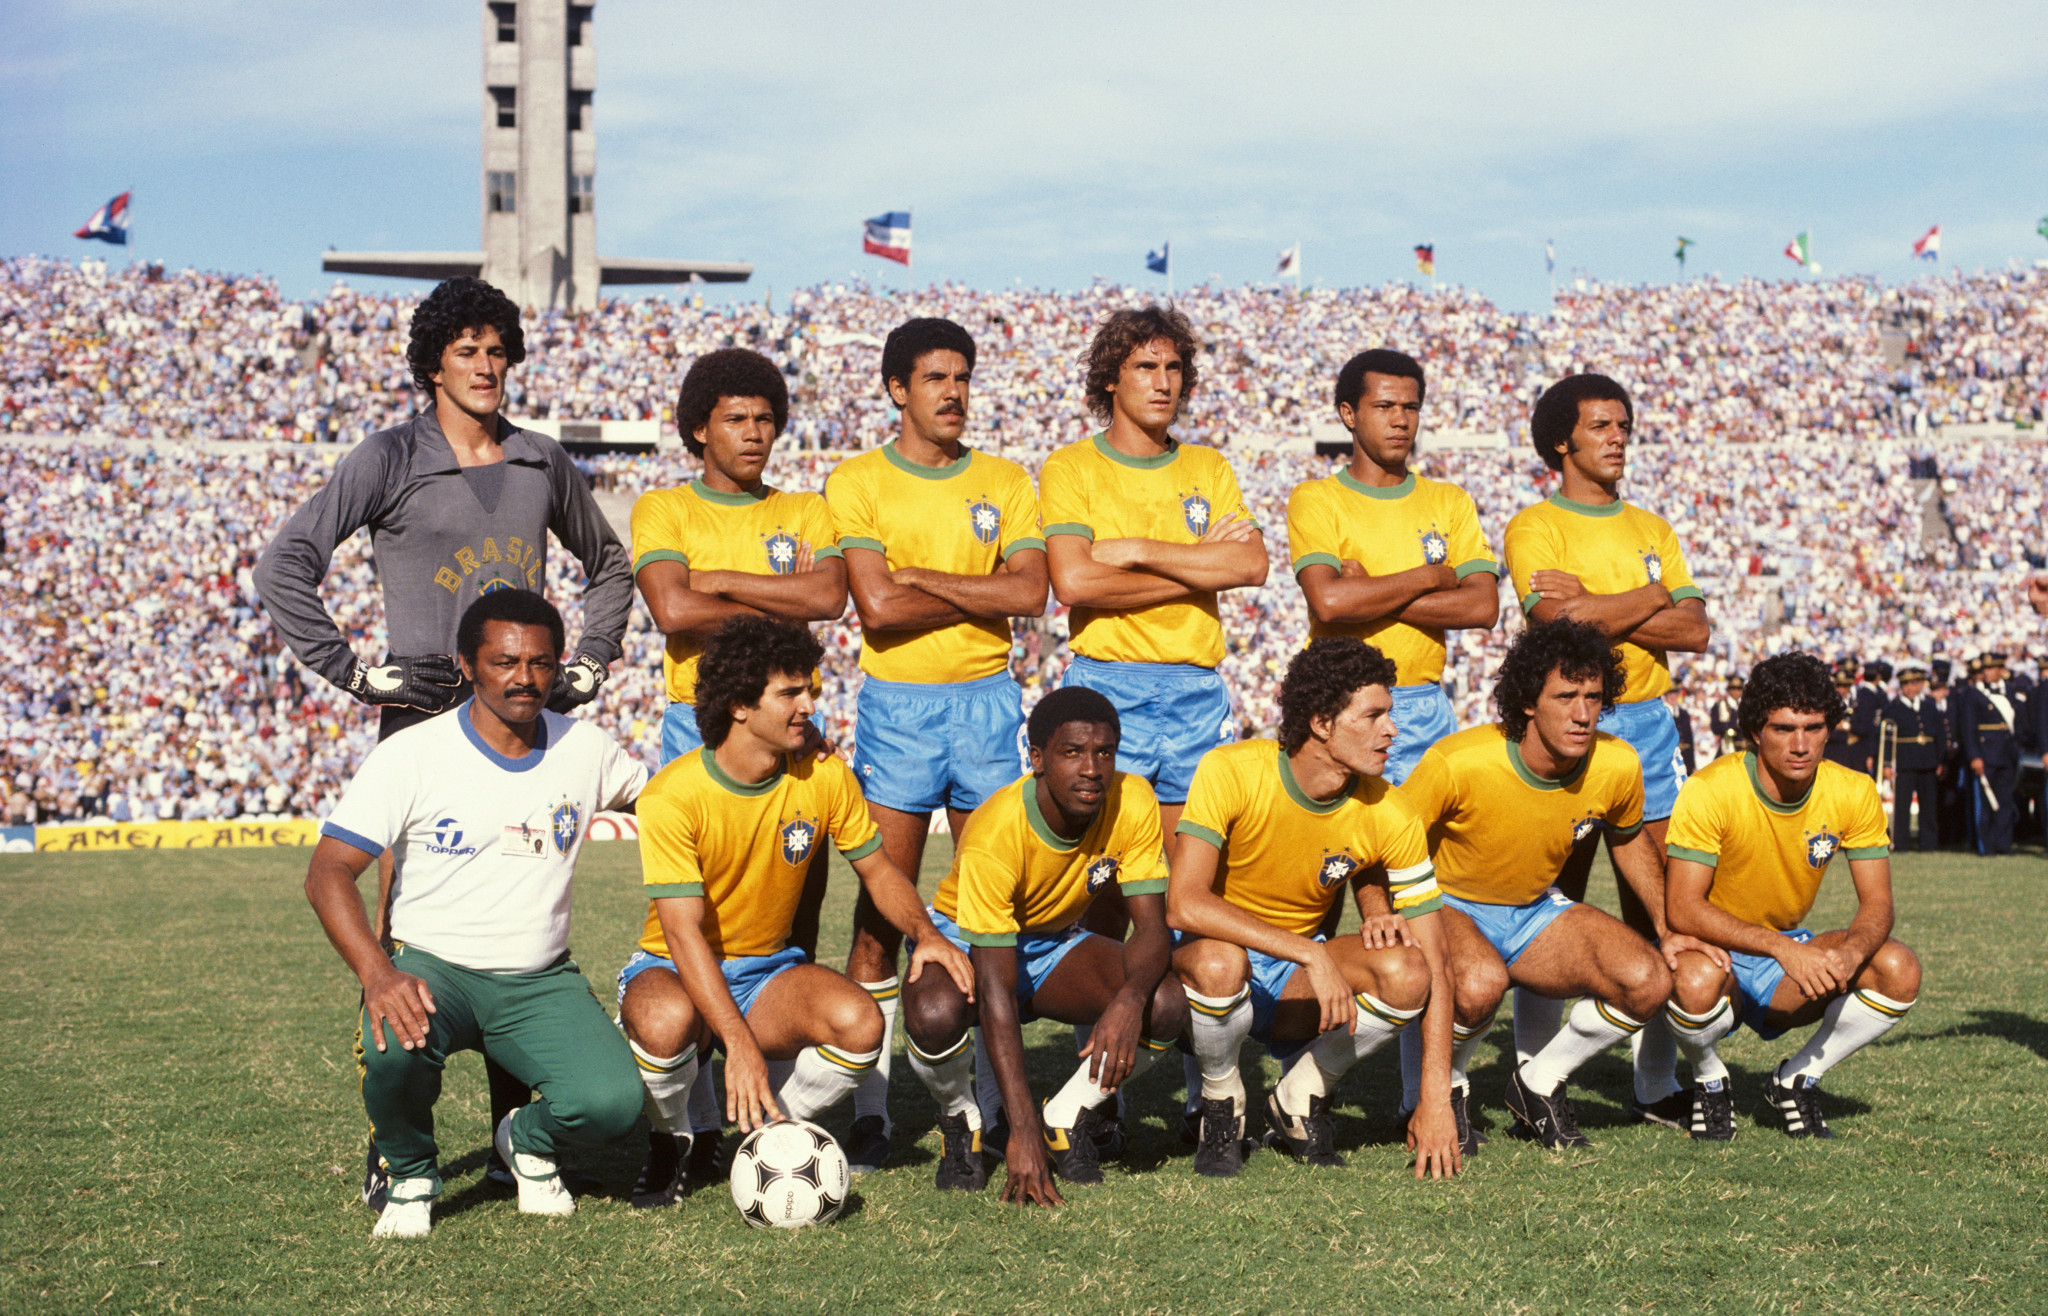 The Brazilian team that faced Argentina in the 1981 edition of the tournament - in a match that ended in a brawl ©Getty Images